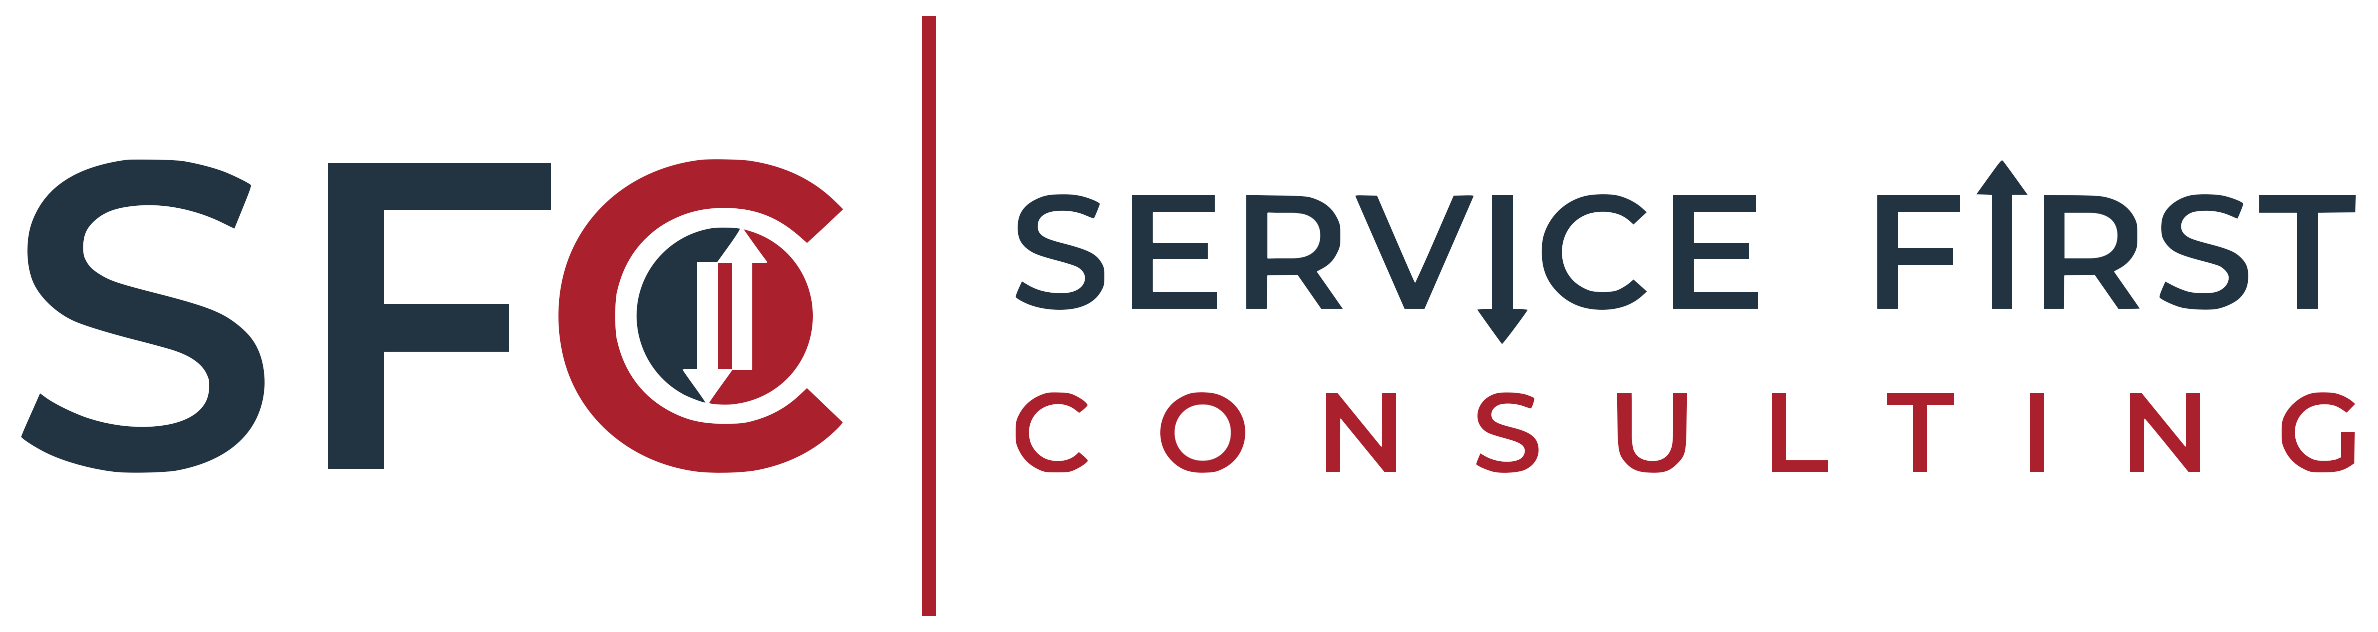 Service First Consulting